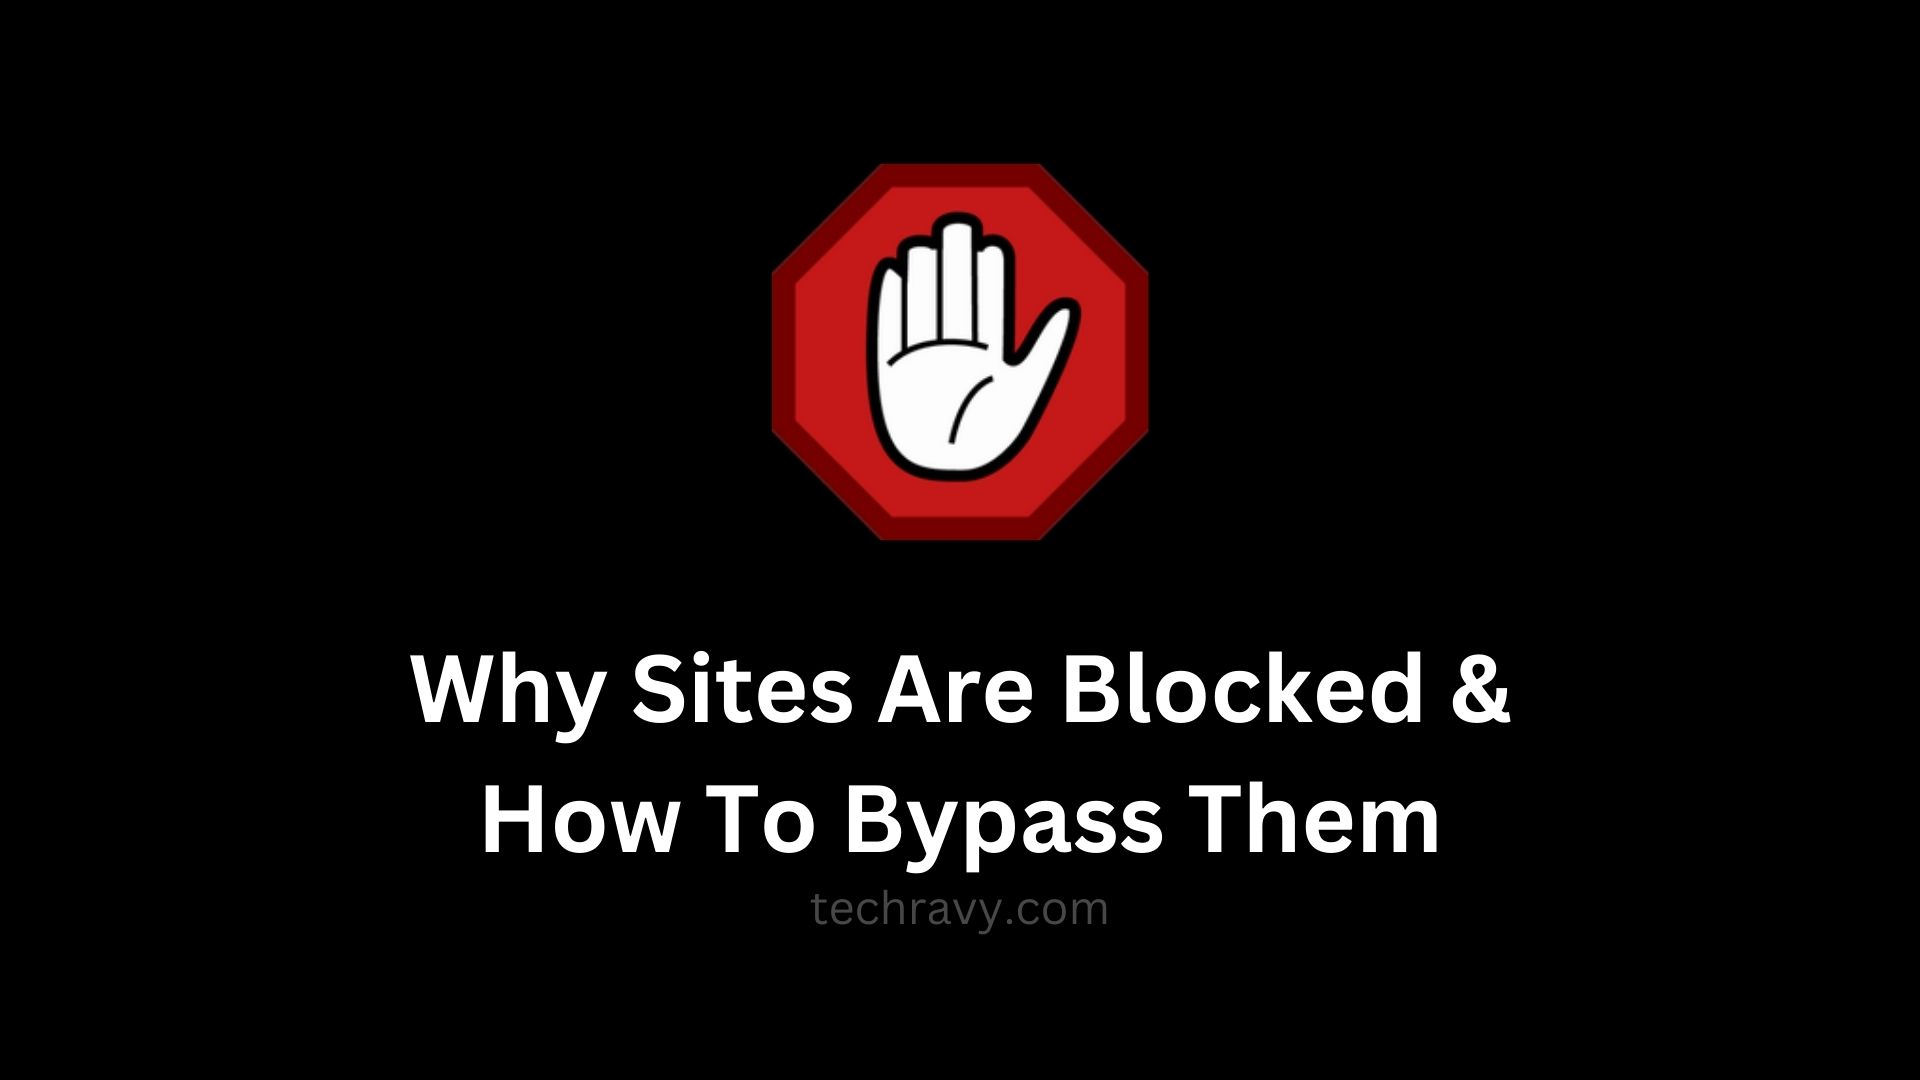 Why Sites Are Blocked & How To Bypass Them